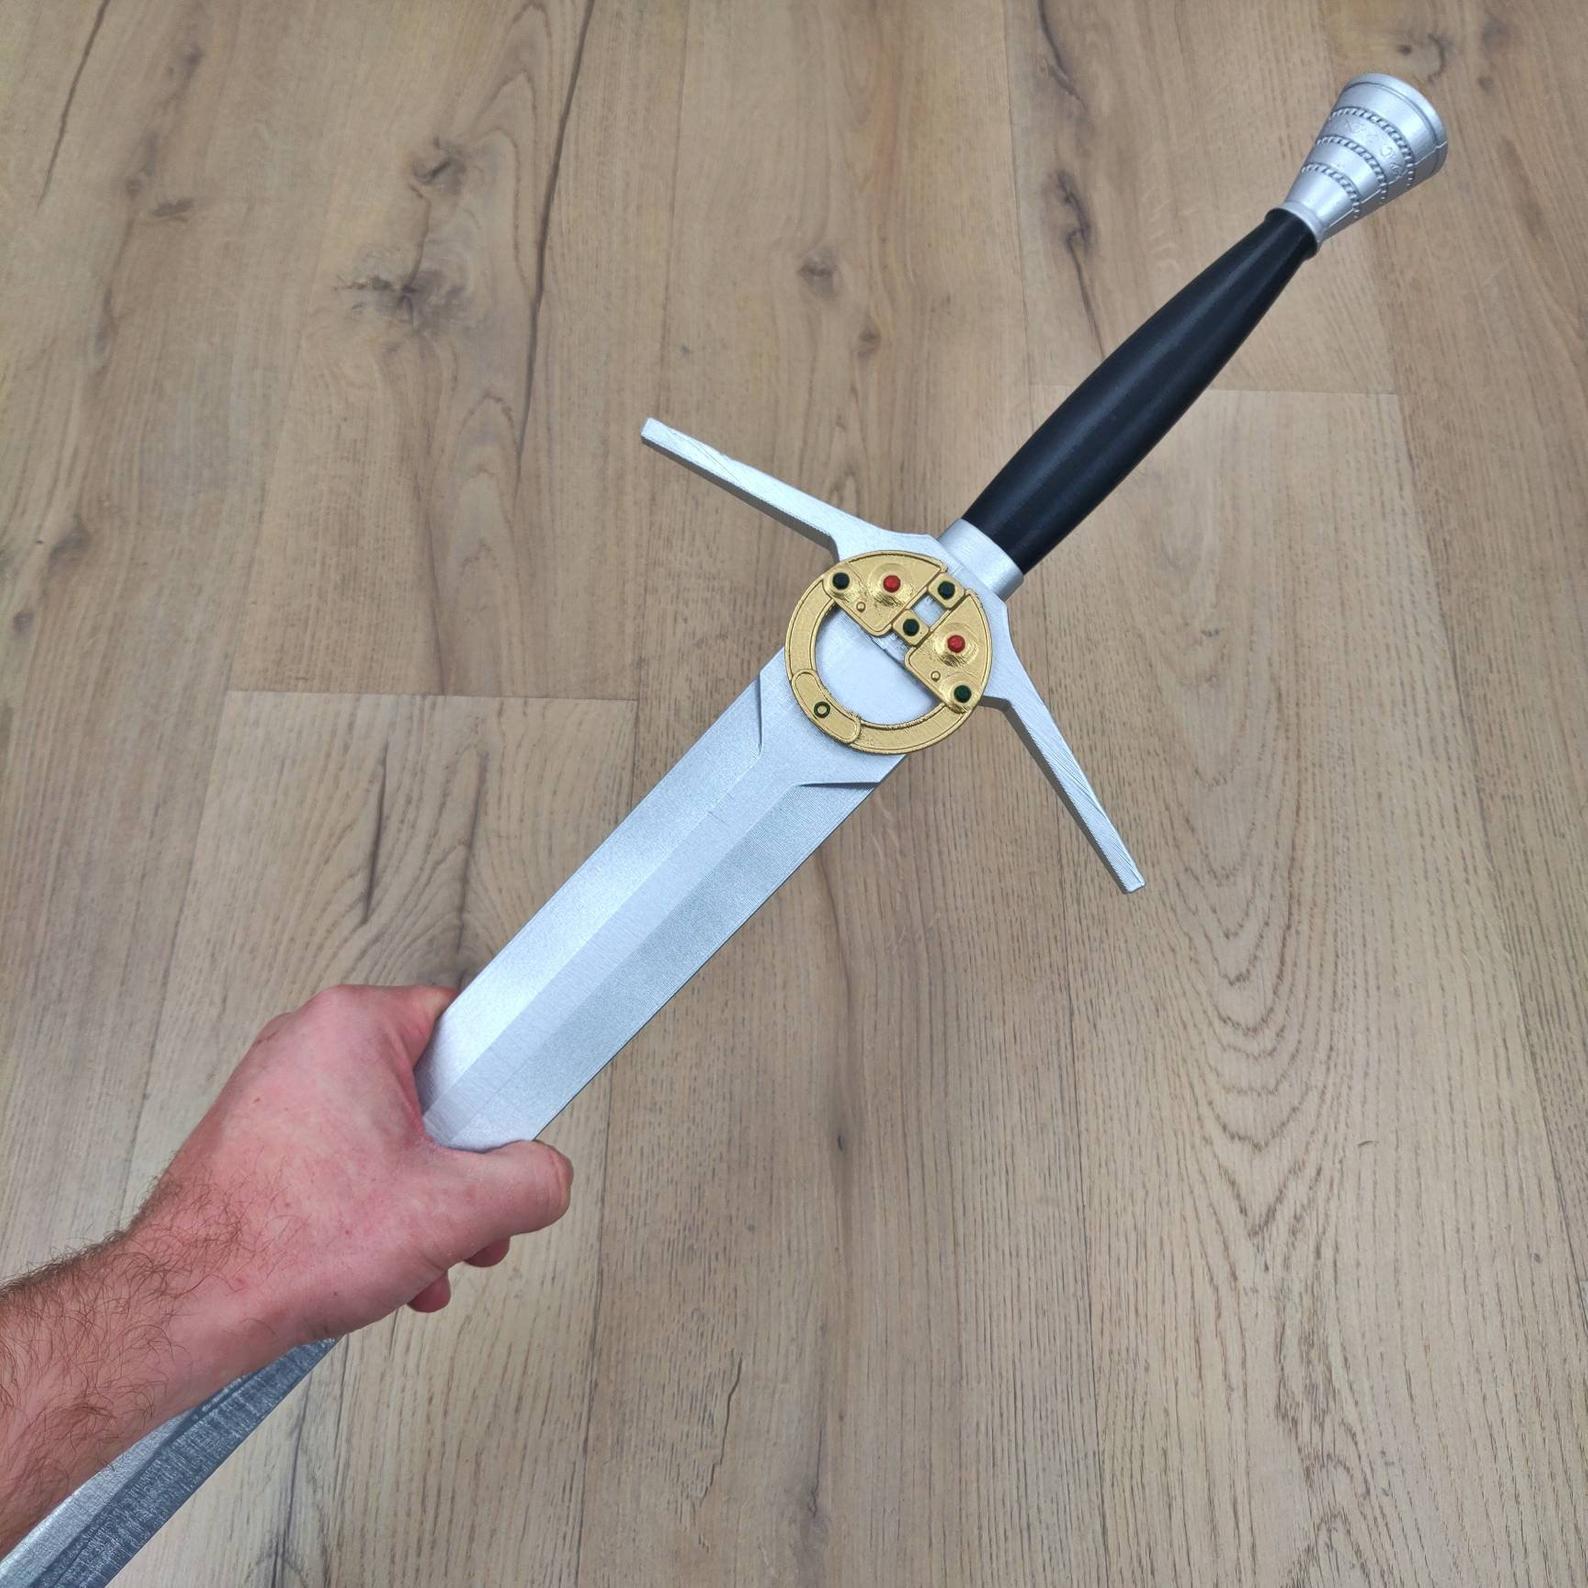 The Witcher - The Sword of Geralt Rivia, Netlifx Series, 3d printed, cosplay prop